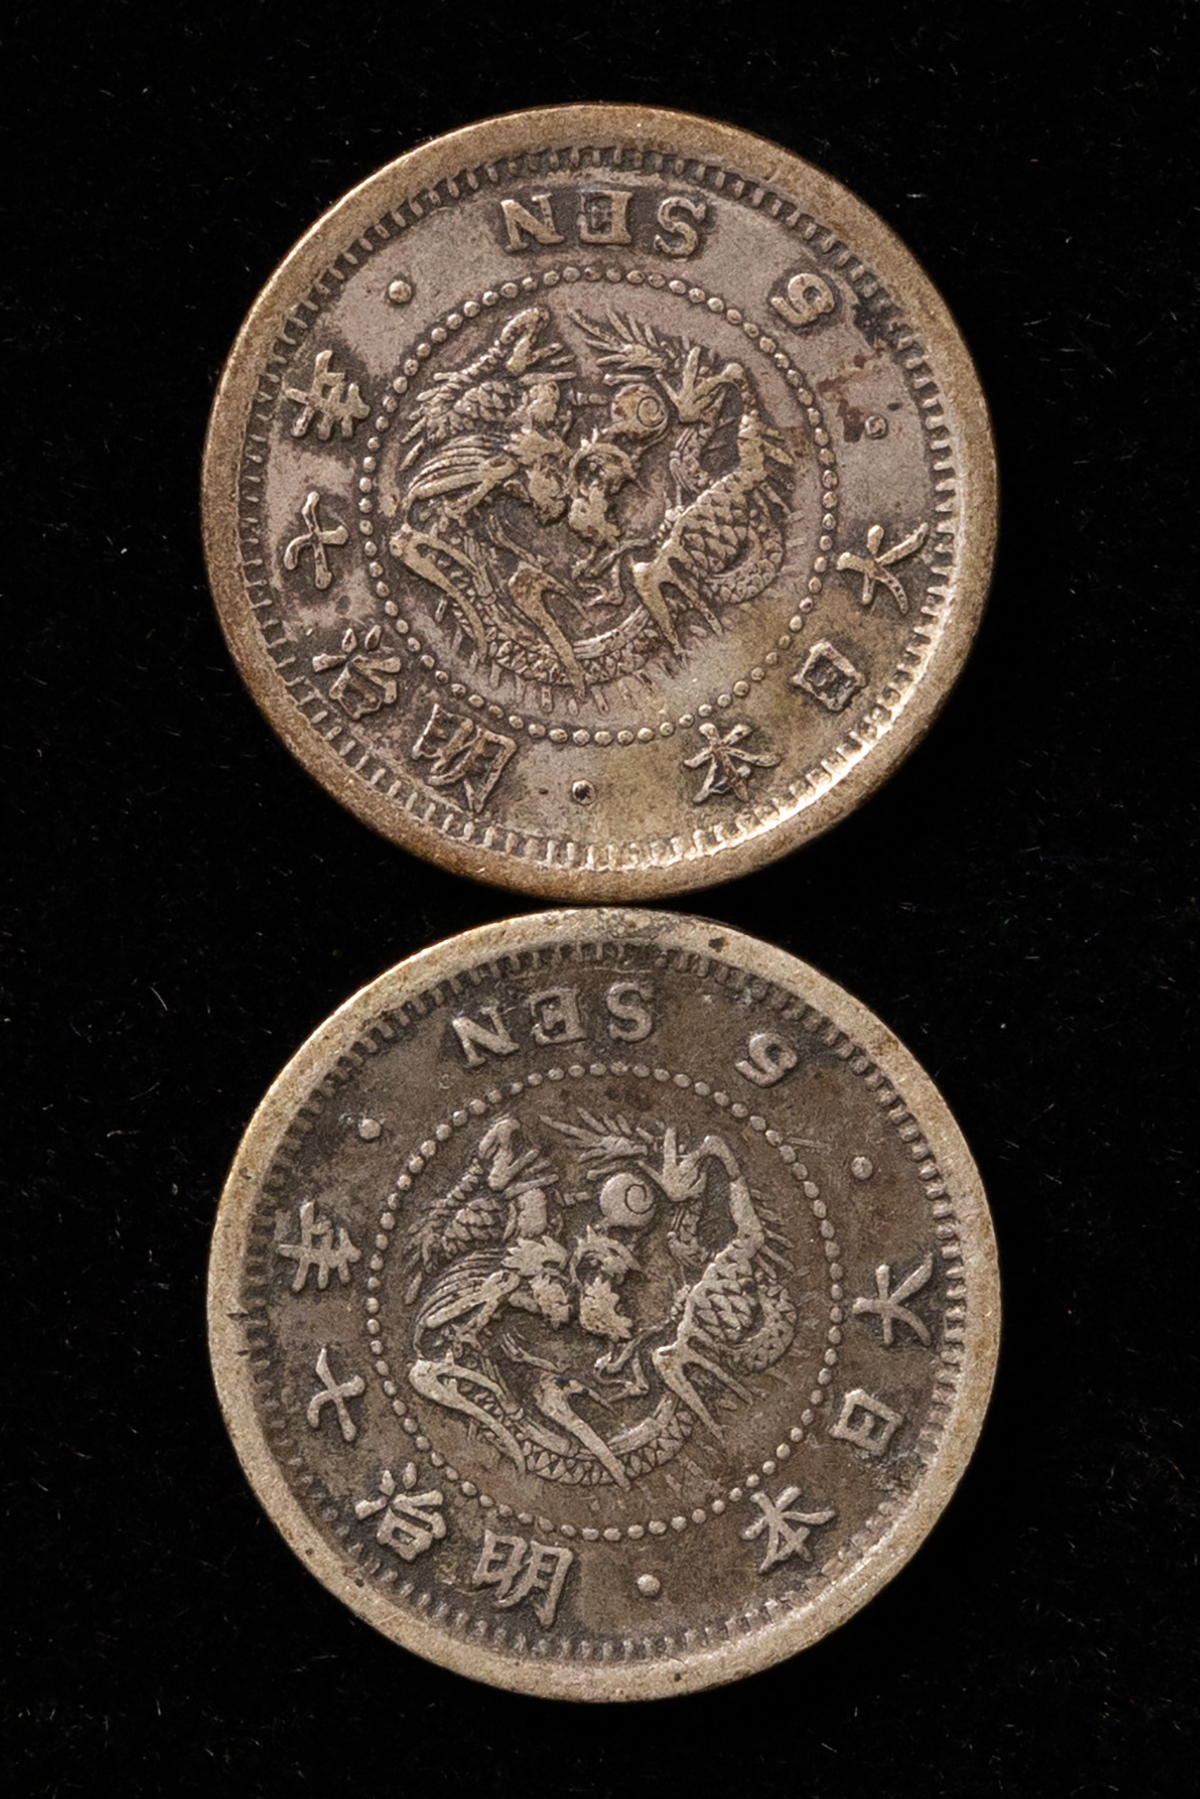 Coin Museum | 竜5銭銀貨（明治7年）計2枚 返品不可 Sold as is No returns